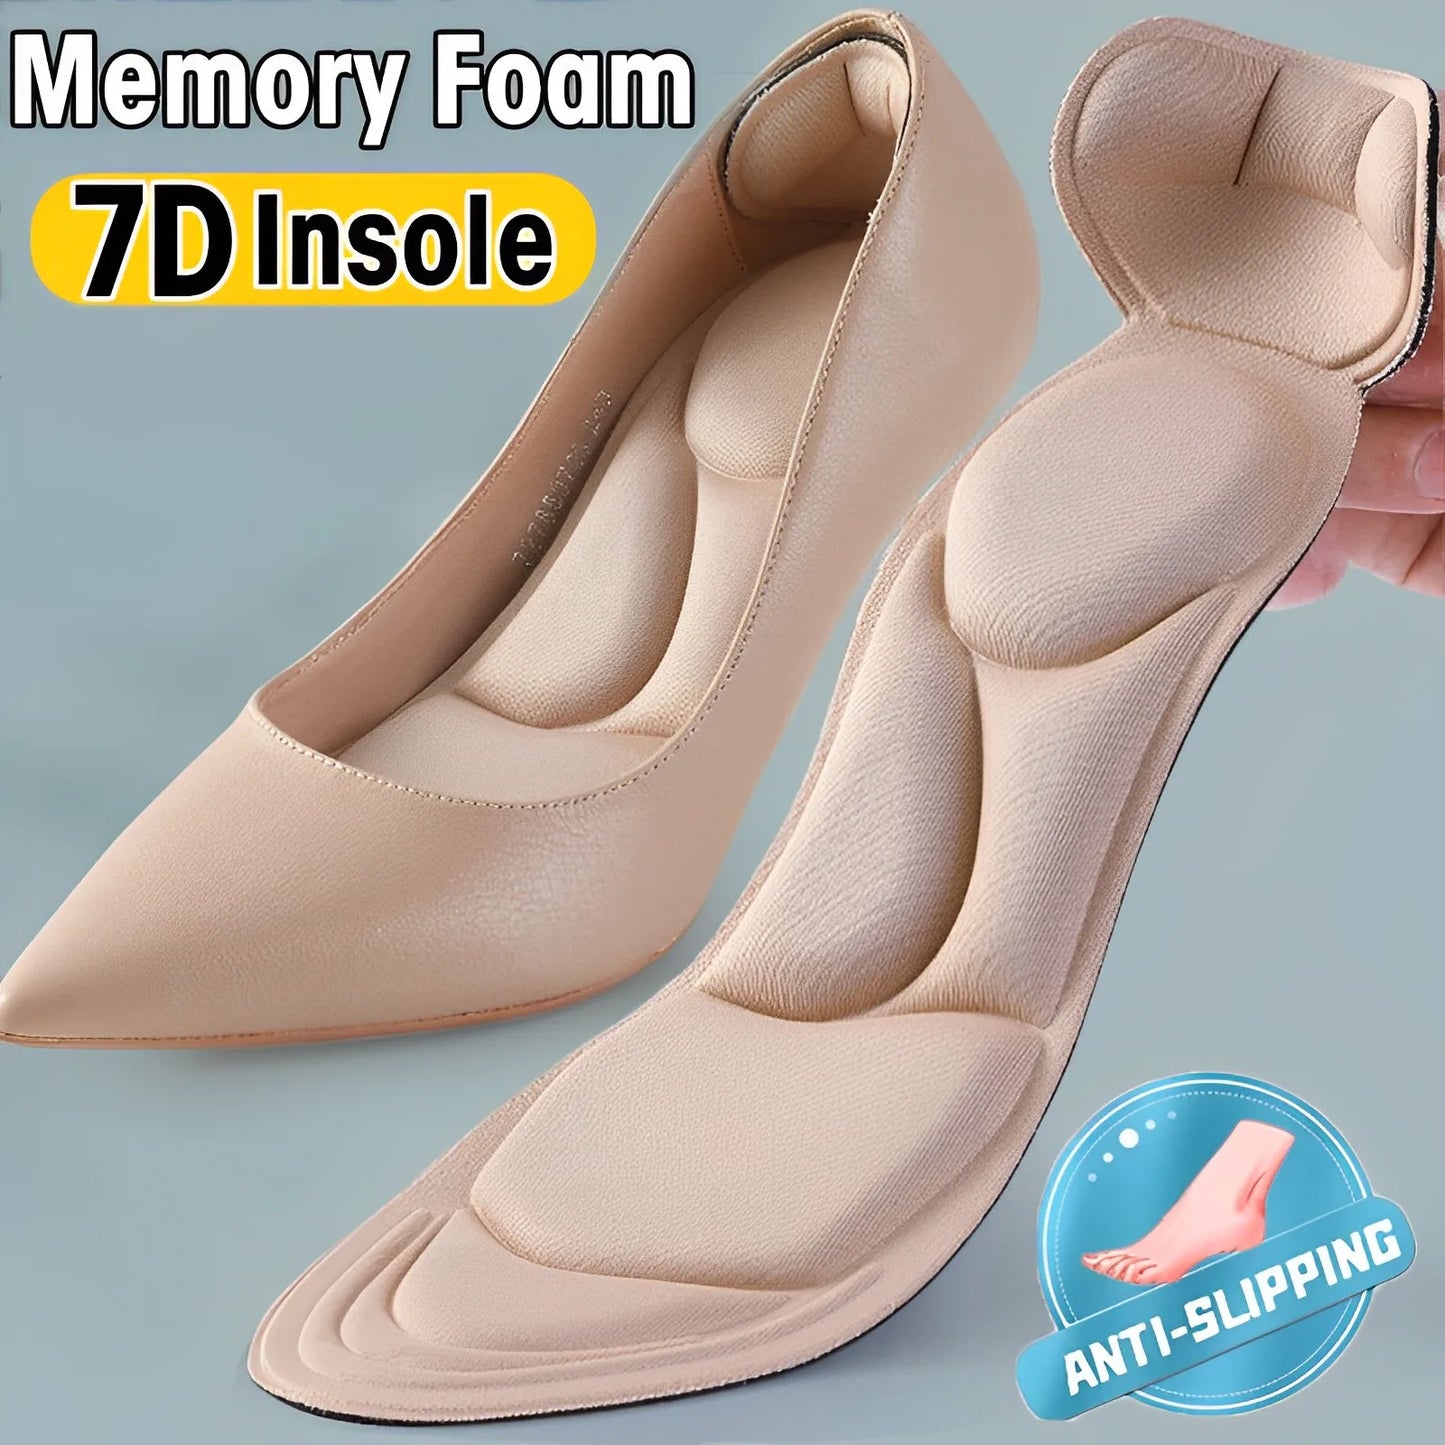 2pcs High Heel Memory Foam Insole Pad Inserts Heel Post Back Breathable Anti-slip for Women Shoe New Shoe Arch Support Insoles